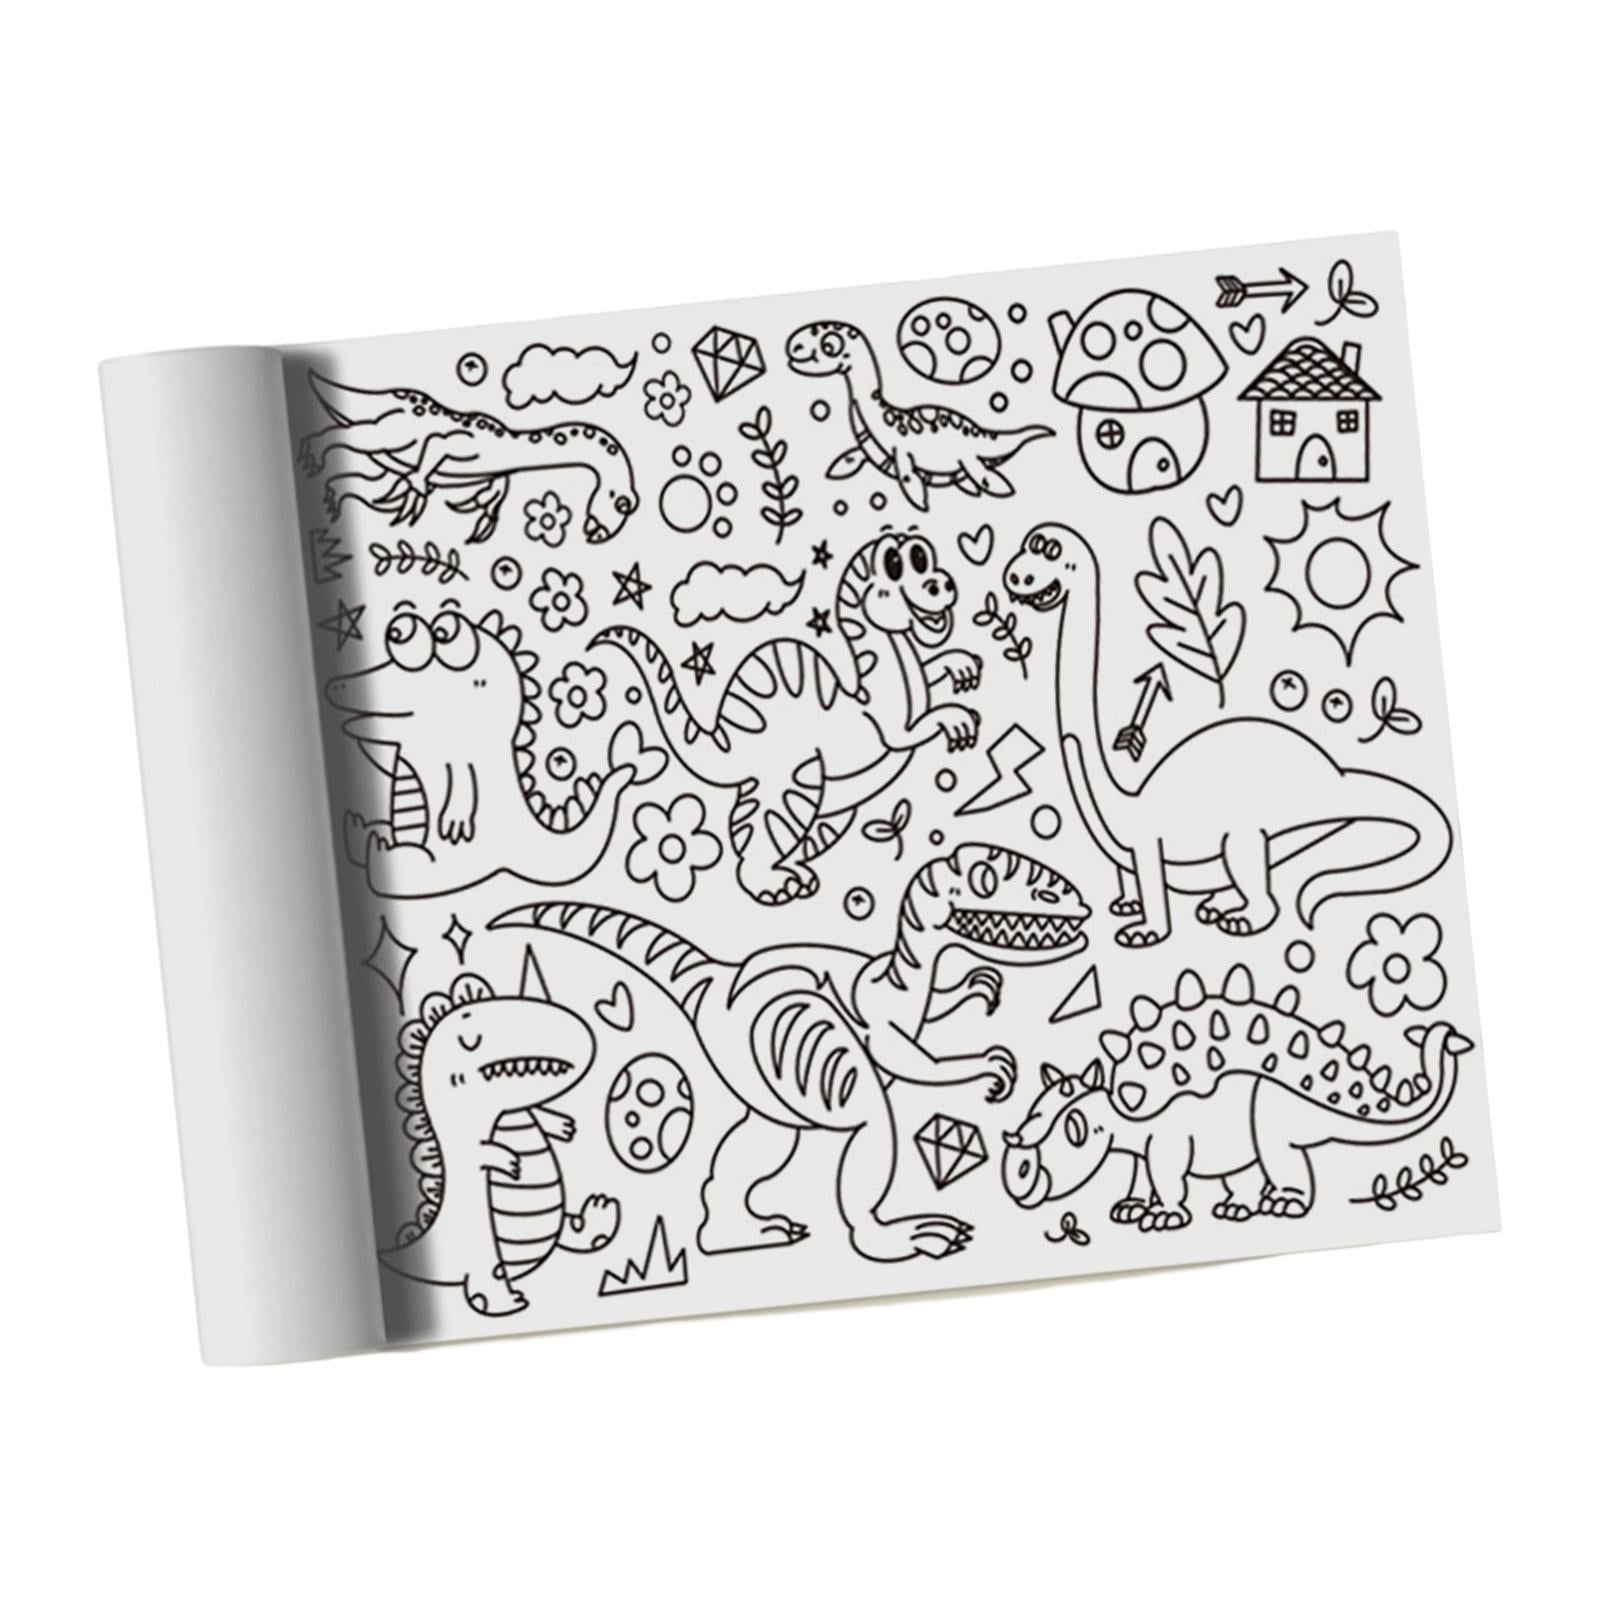 COHEALI 8 Rolls Graffiti Drawing Paper tracing Paper for Drawing Sketch  Paper for Drawing Art Paper for Coloring Painting Decal Drawing for Kids